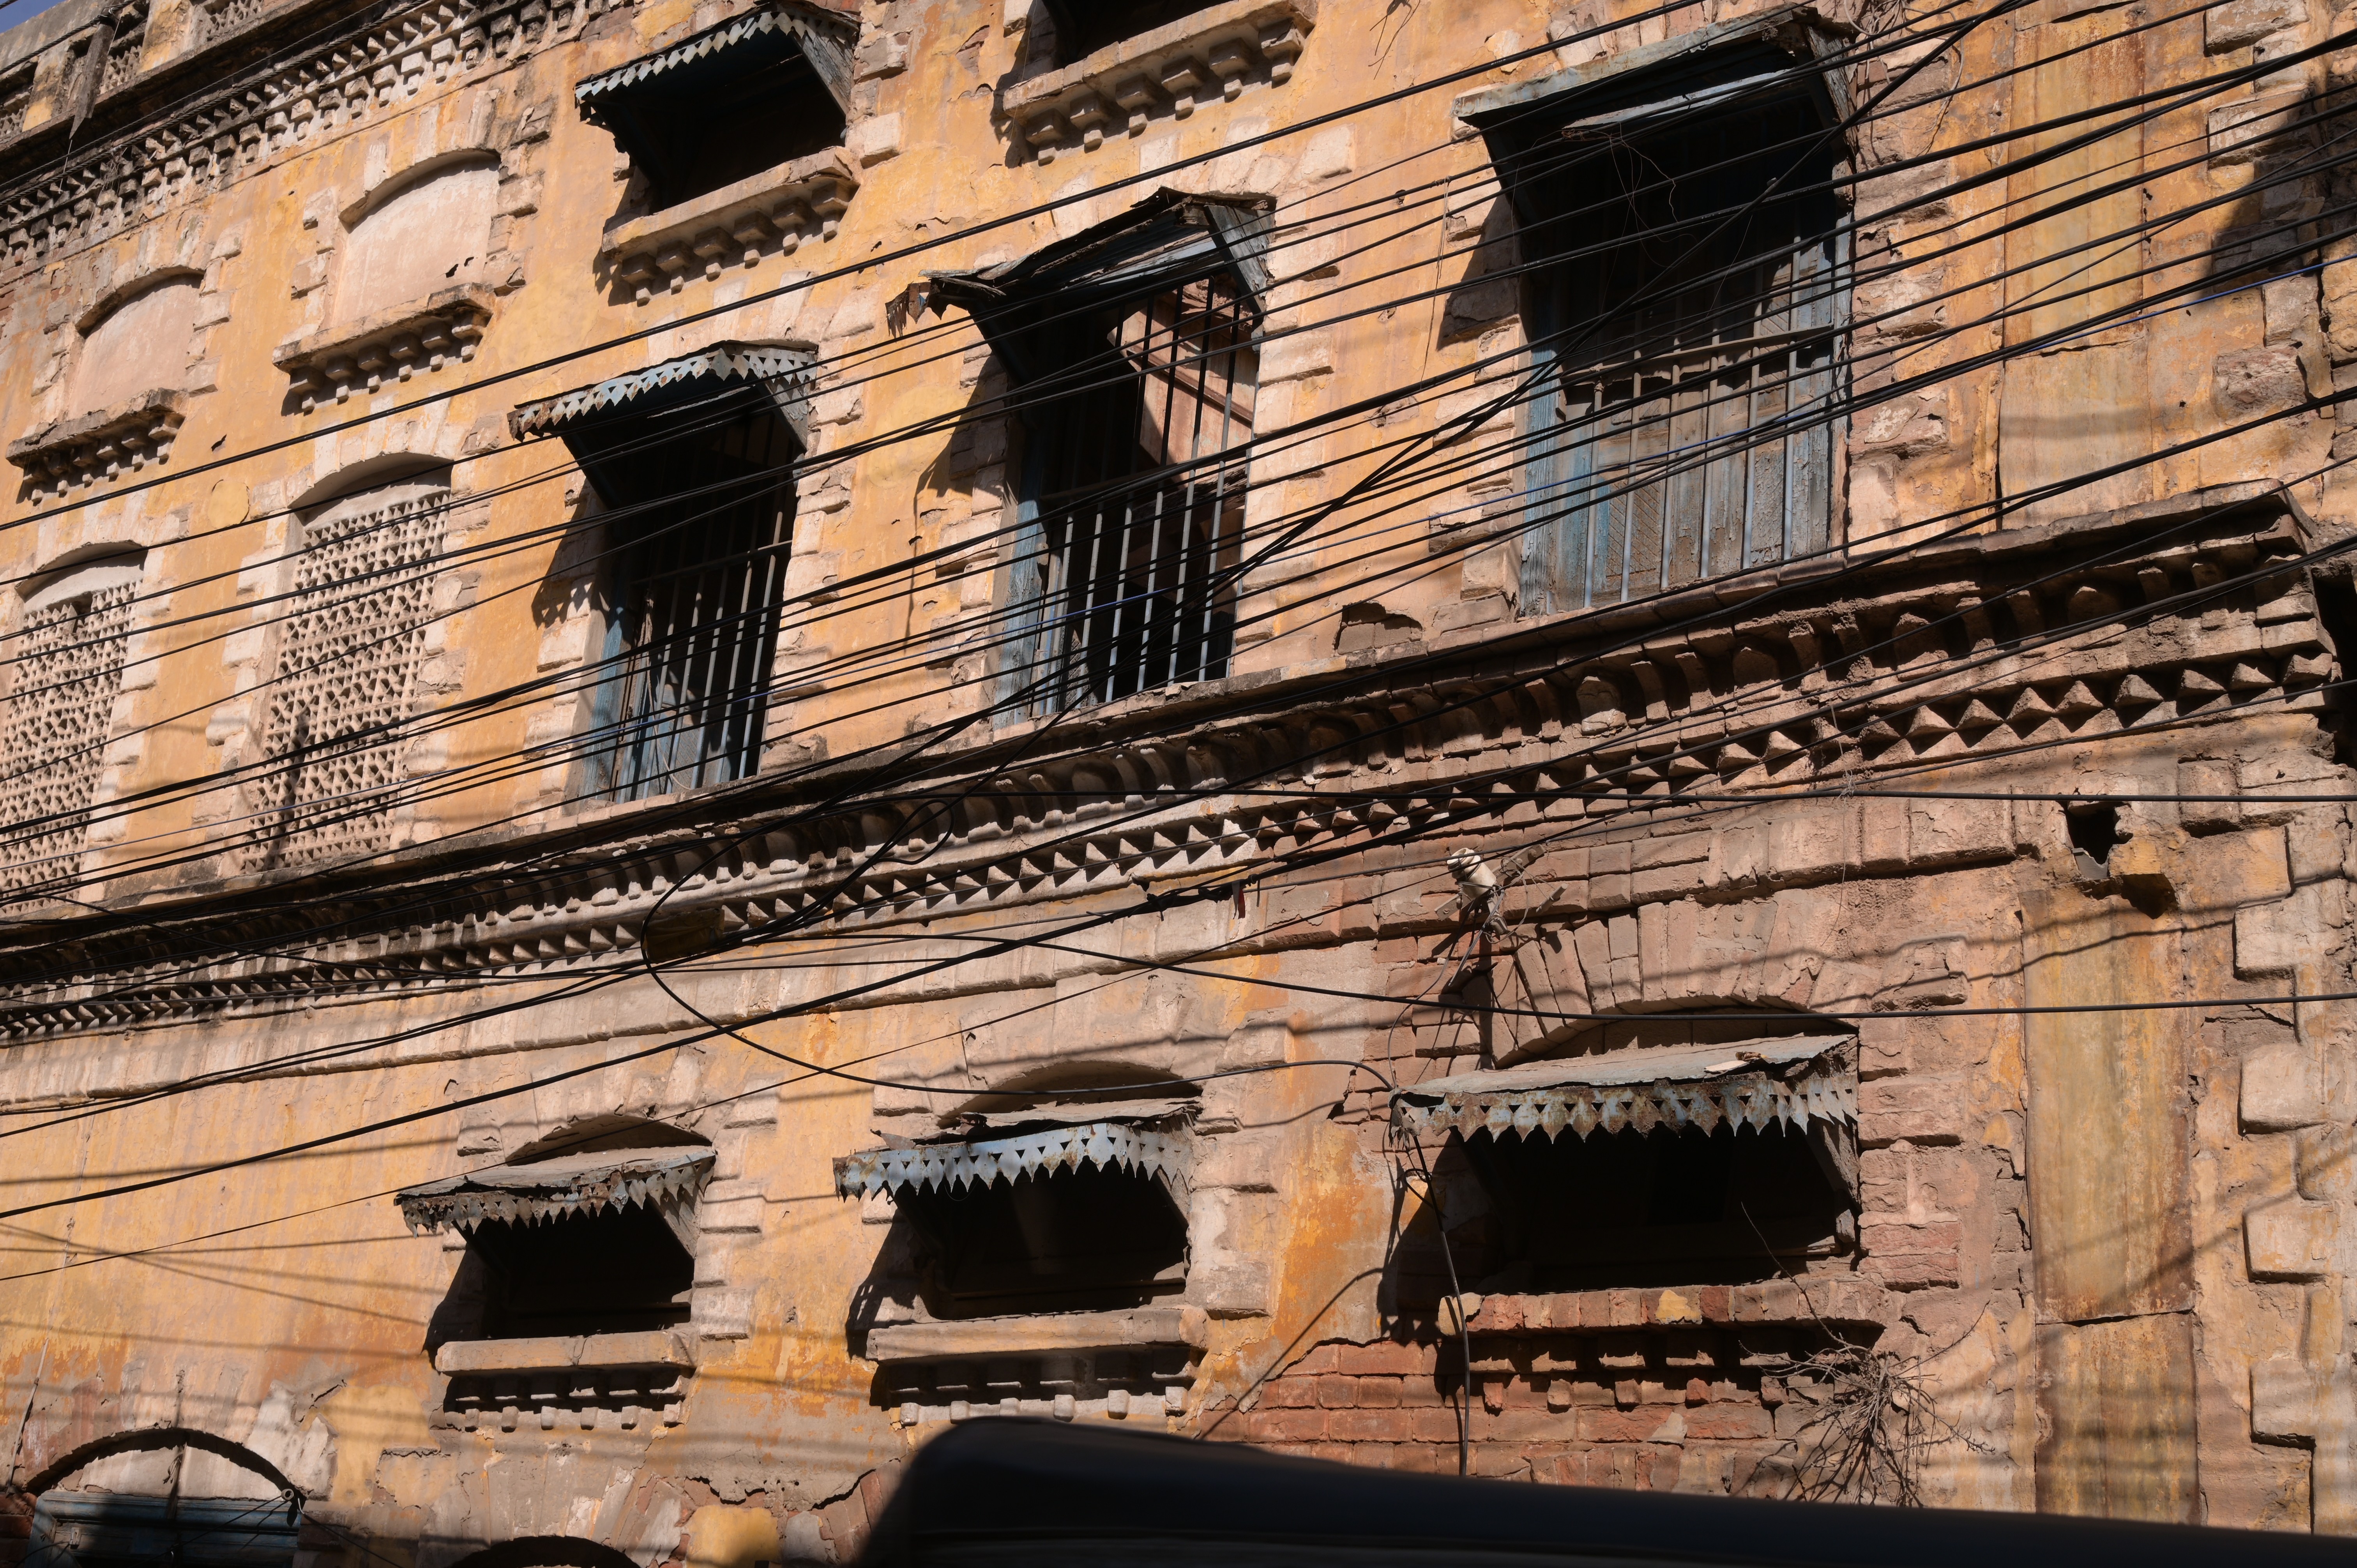 An old building in Rawalpindi's Bhabra Bazar: a complete journey into the majestic past